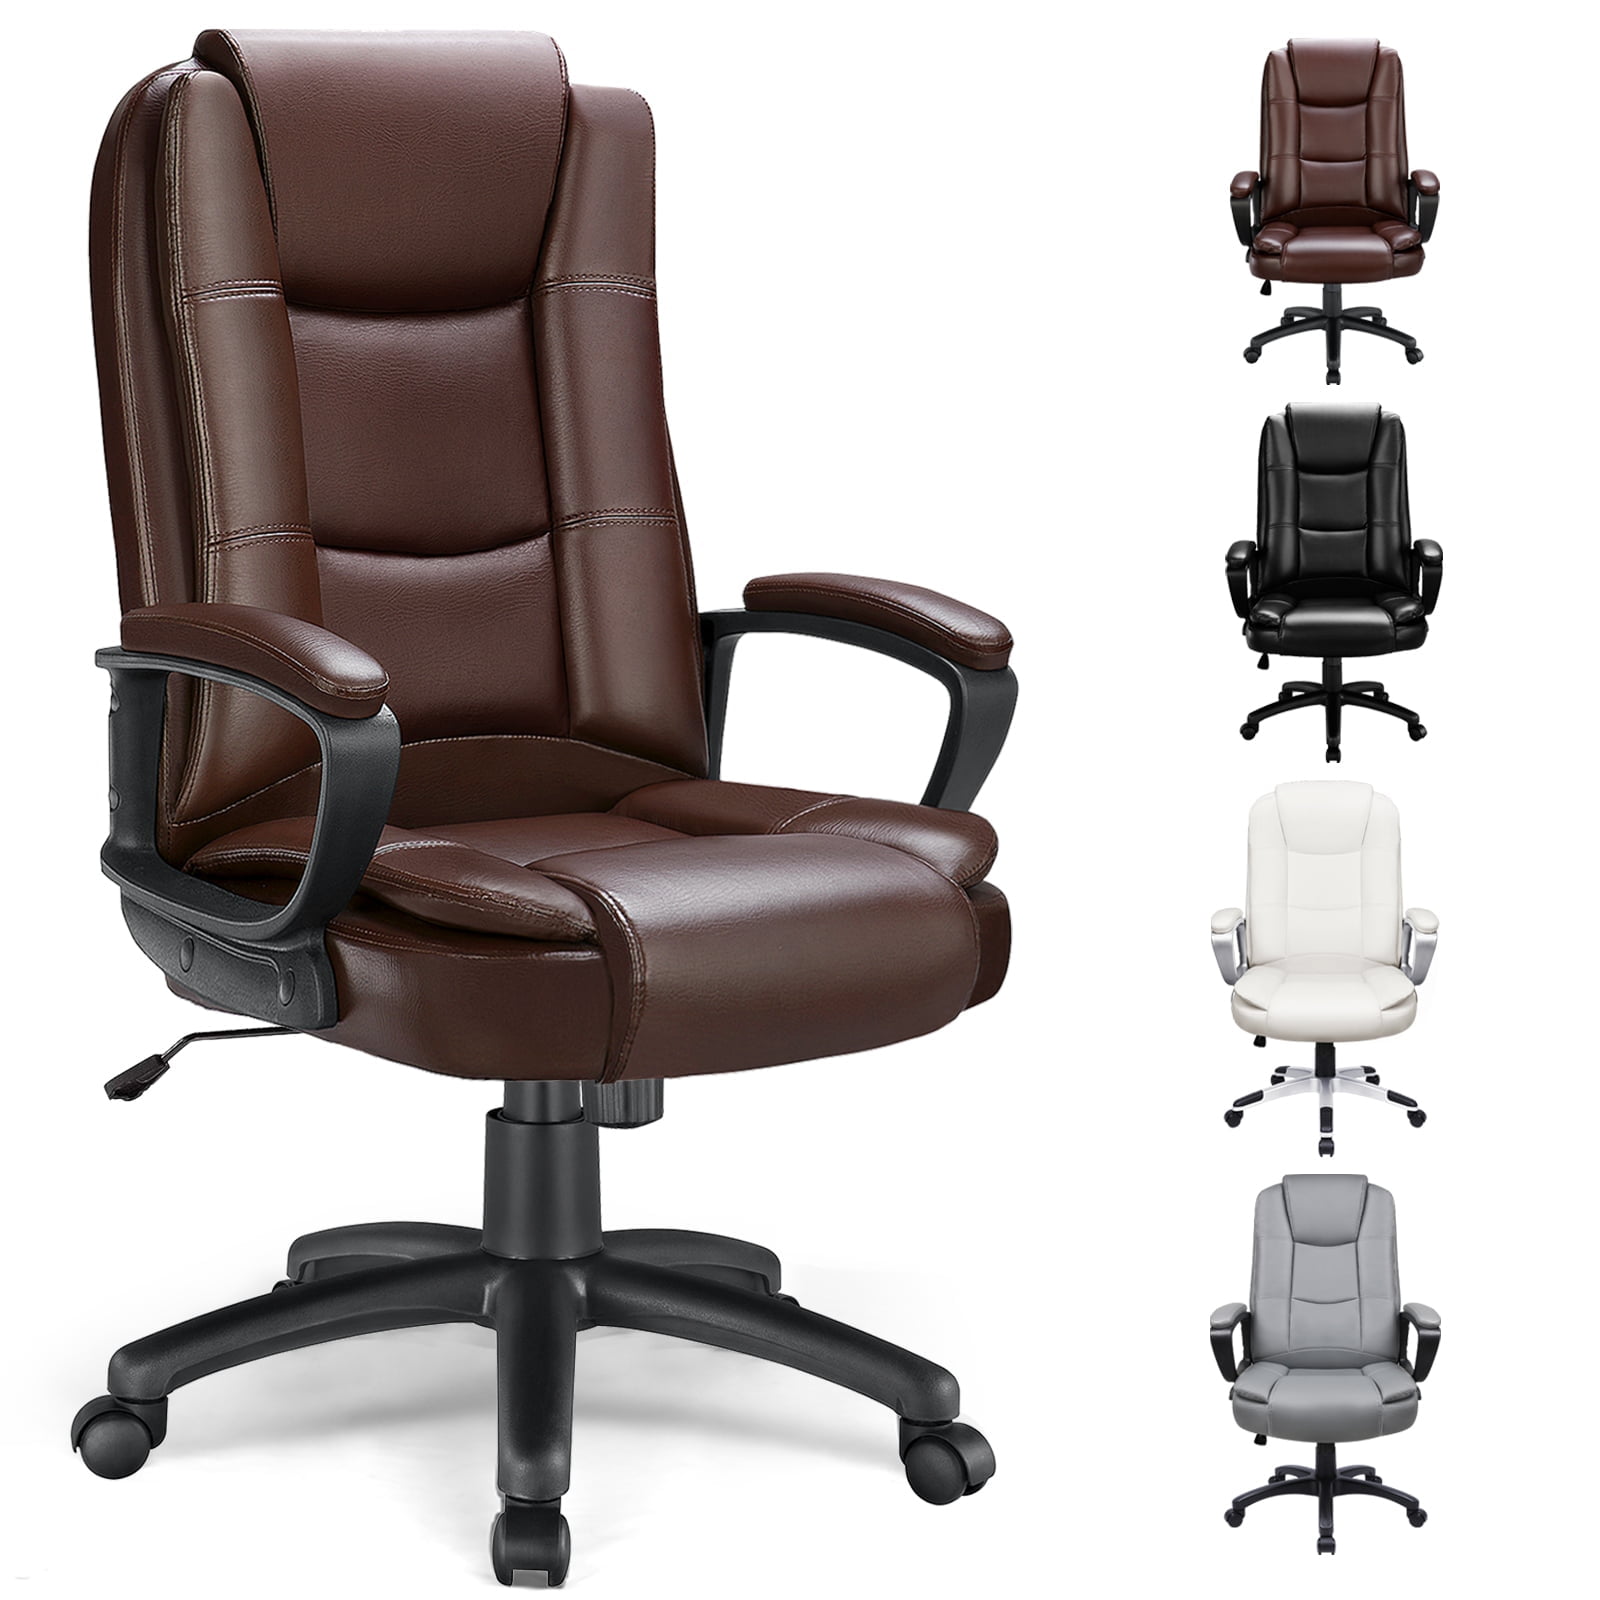 Hoffree Big and Tall Office Chair 500lb Computer Desk Chair Heavy